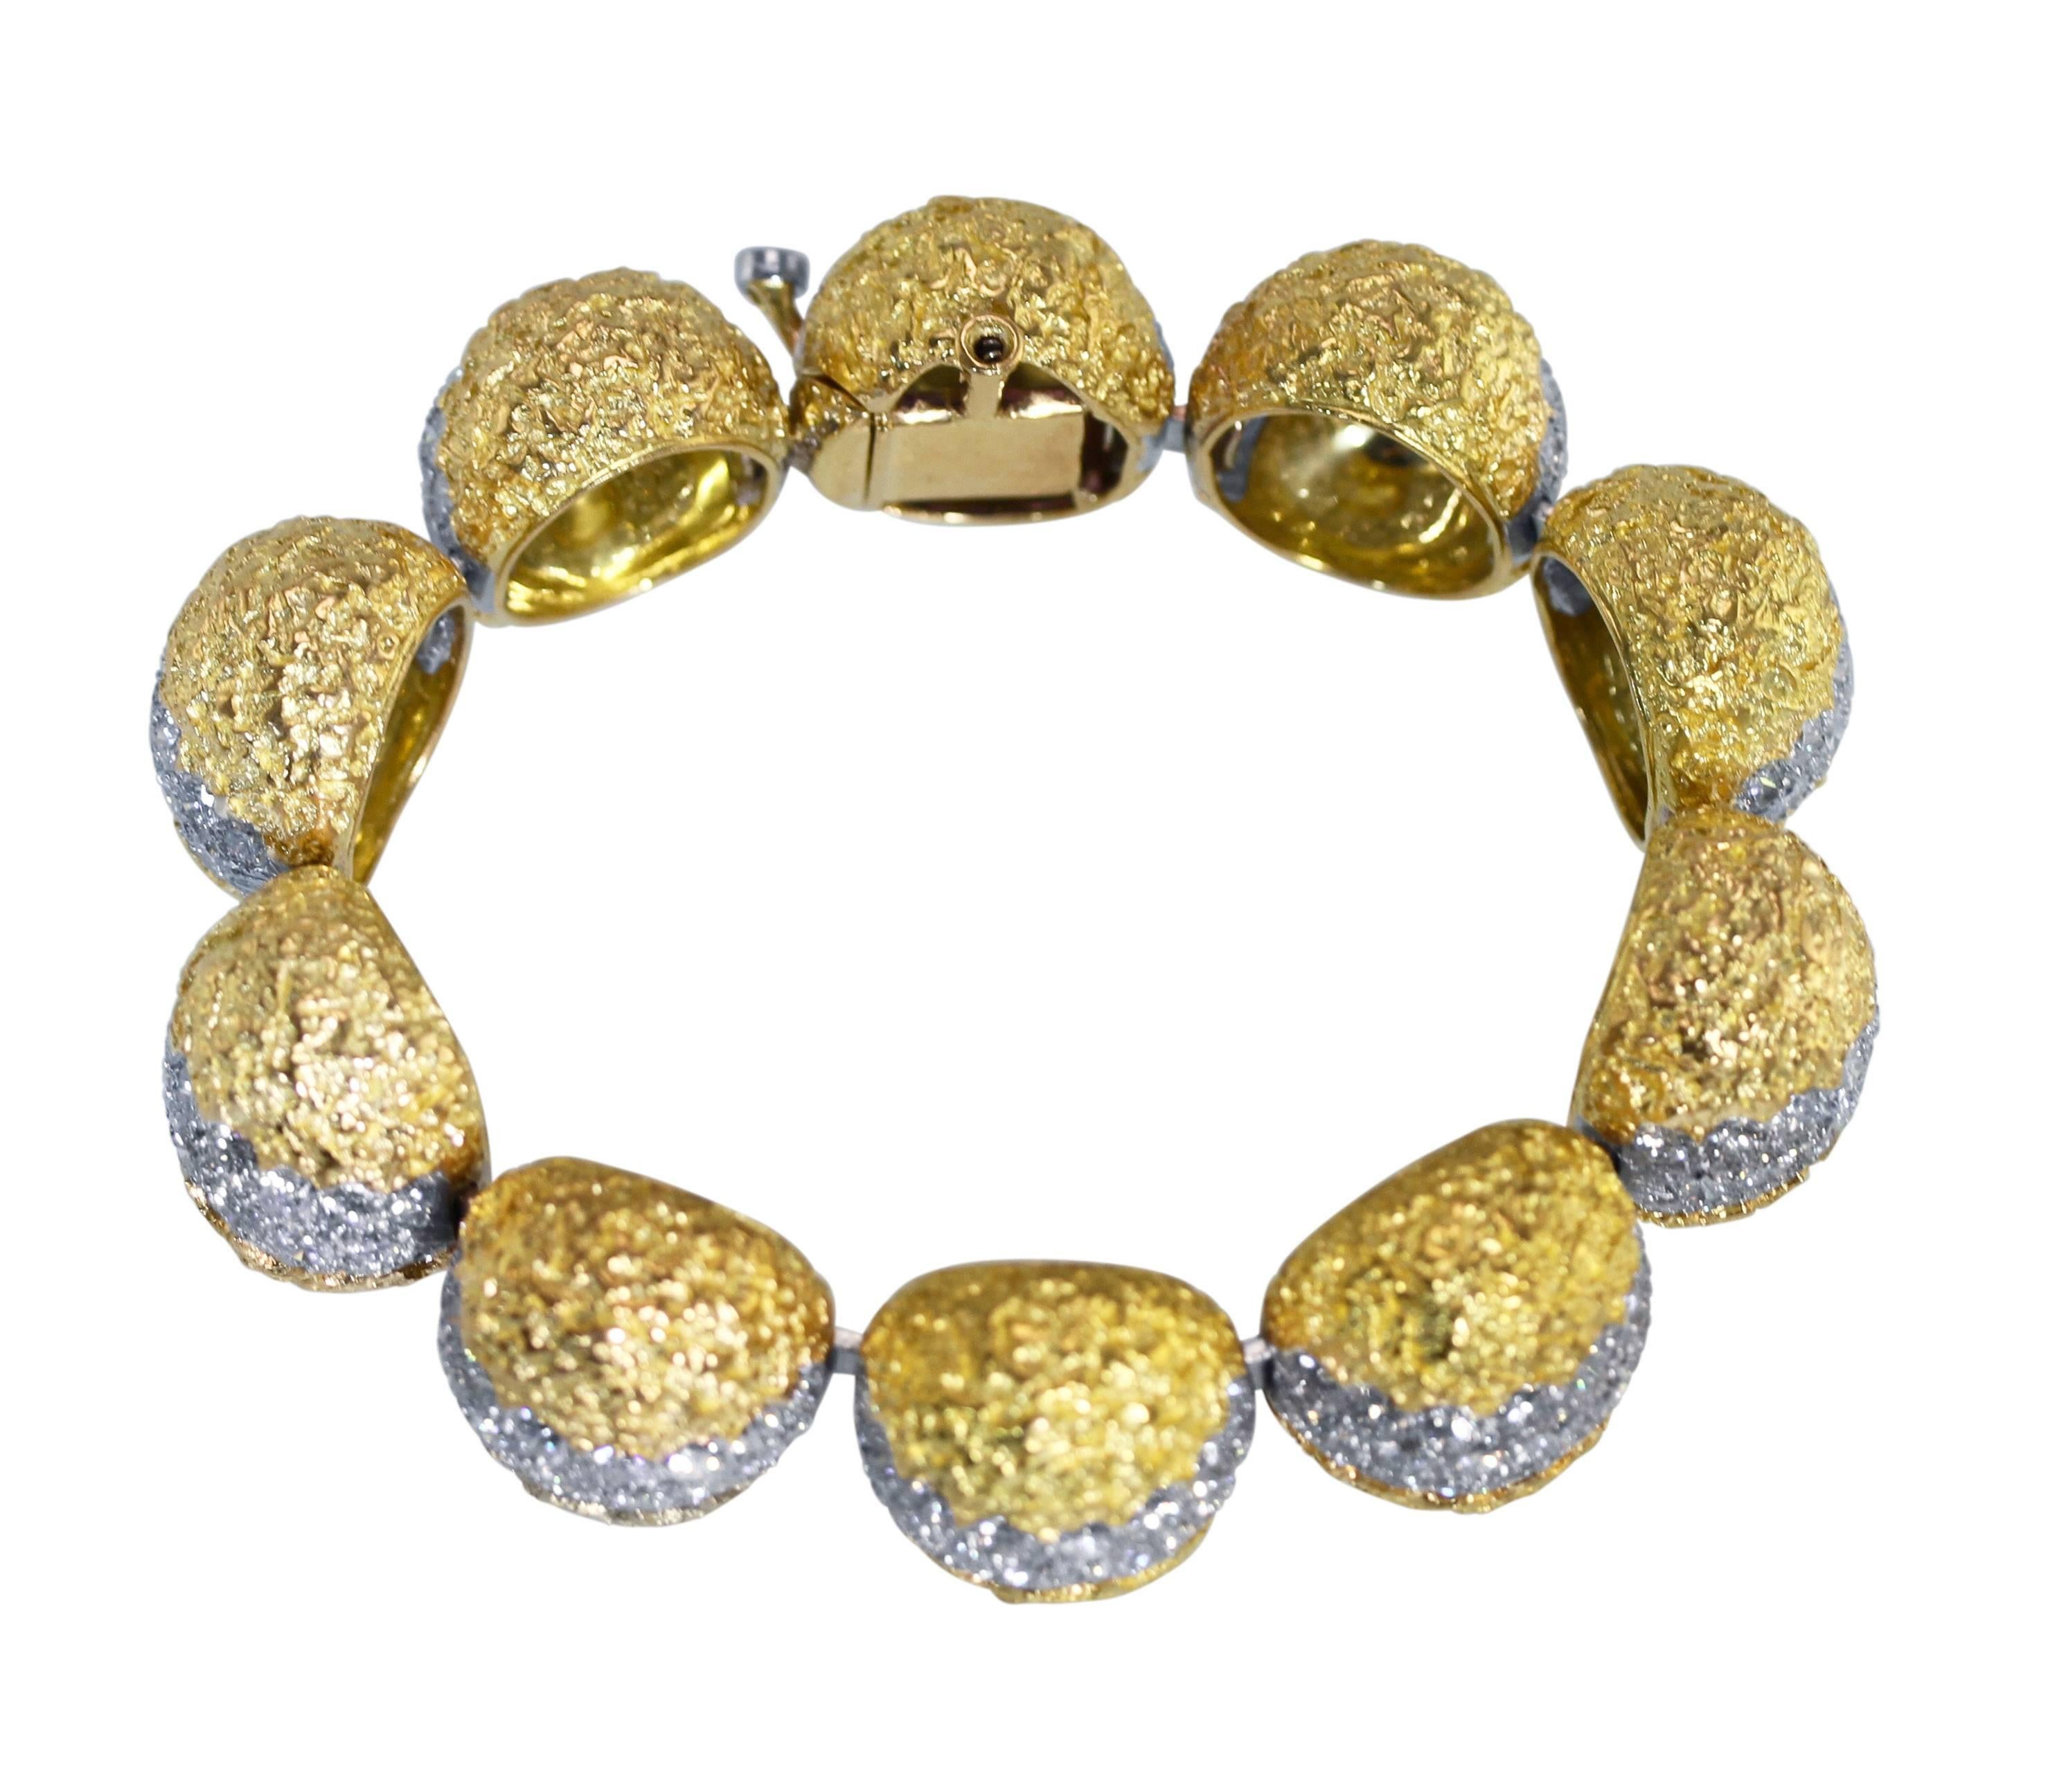 An 18 karat yellow gold, platinum and diamond bracelet by Cartier, France, circa 1970, comprised of ten dome links, set with 228 round diamonds weighing approximately 20.00 carats, length 7 inches, width 3/4 inch, gross weight 83.3 grams, signed